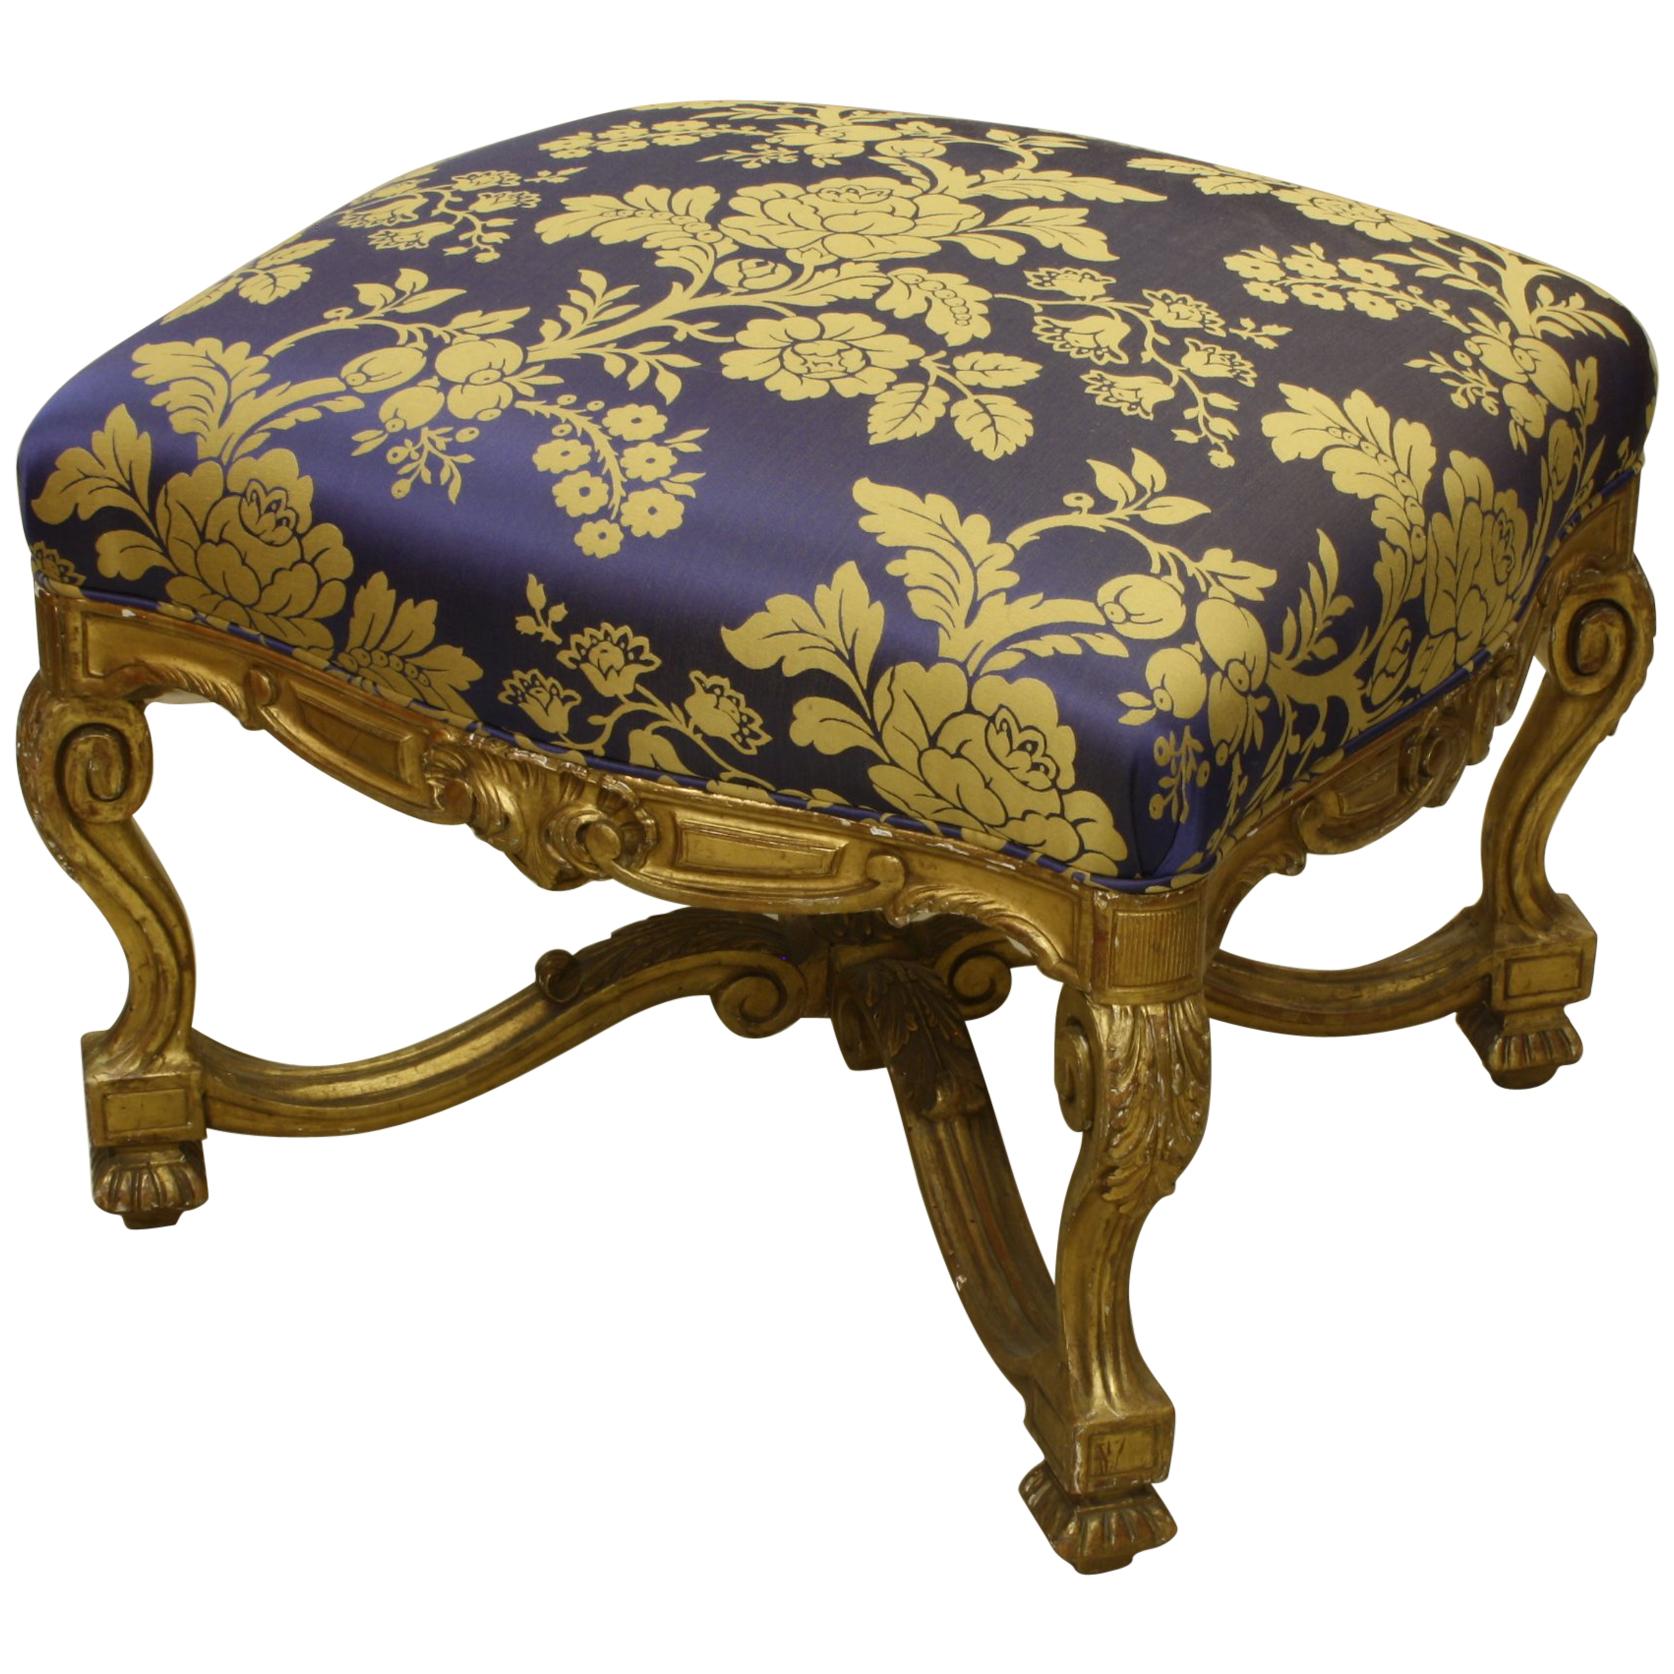 French Regence Style Carved Giltwood Stool, Tabouret or Ottoman